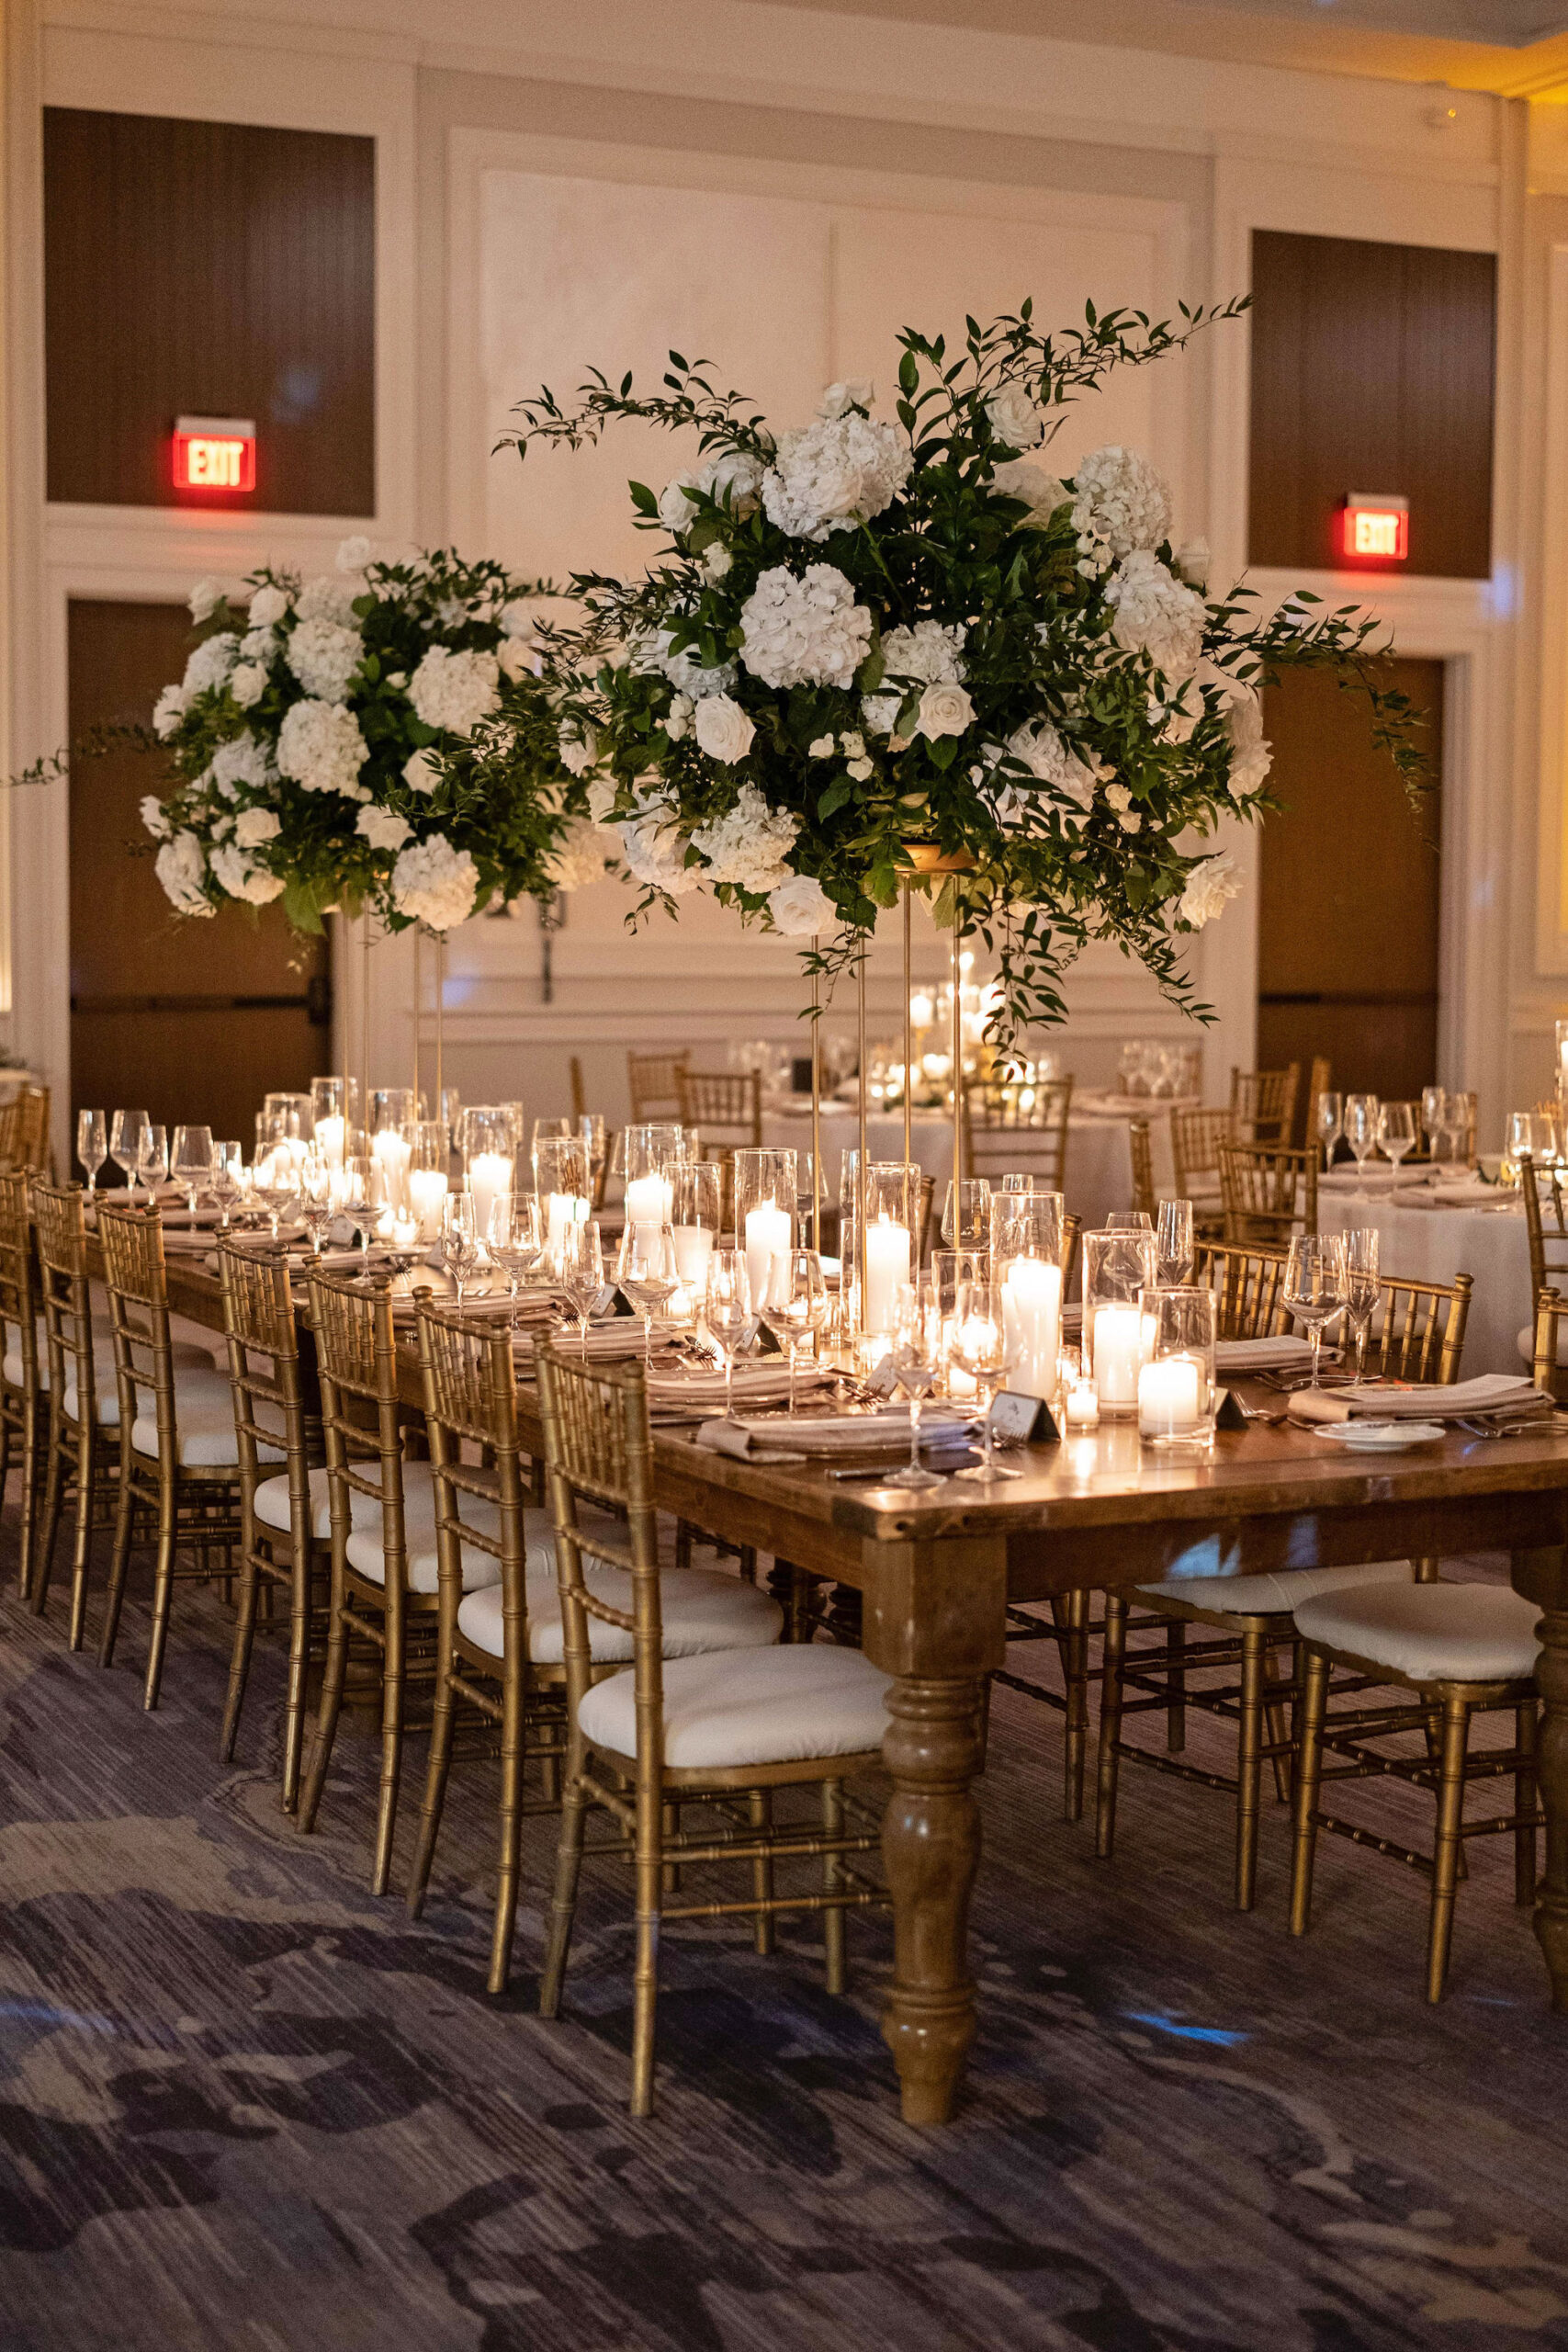 Elegant White Hydrangea and Rose Floral Arrangements with Ruscus Greenery | Long Feasting Table with Gold Chiaviari Chairs | Candlelit Centerpieces | Tampa Bay Rental Company Gabro Event Services | A Chair Affair | Bruce Wayne Florals